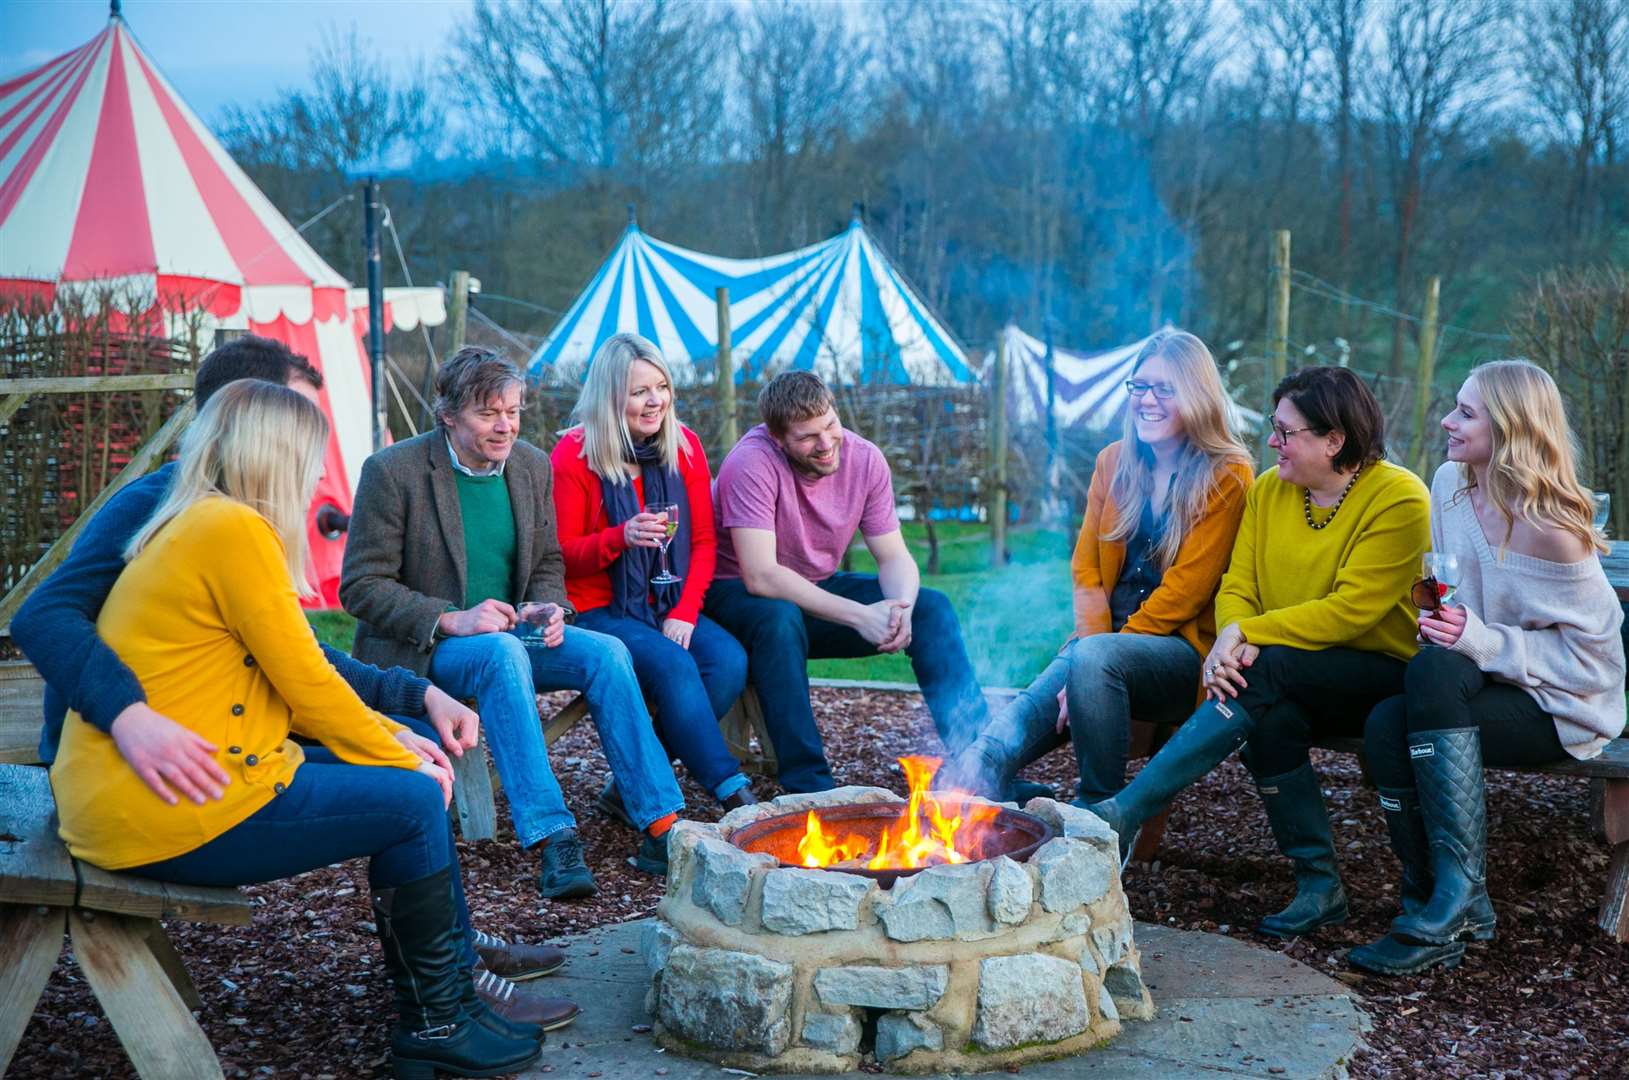 Gather round the fire pit while glamping. Picture: www.matthewwalkerphotography.com